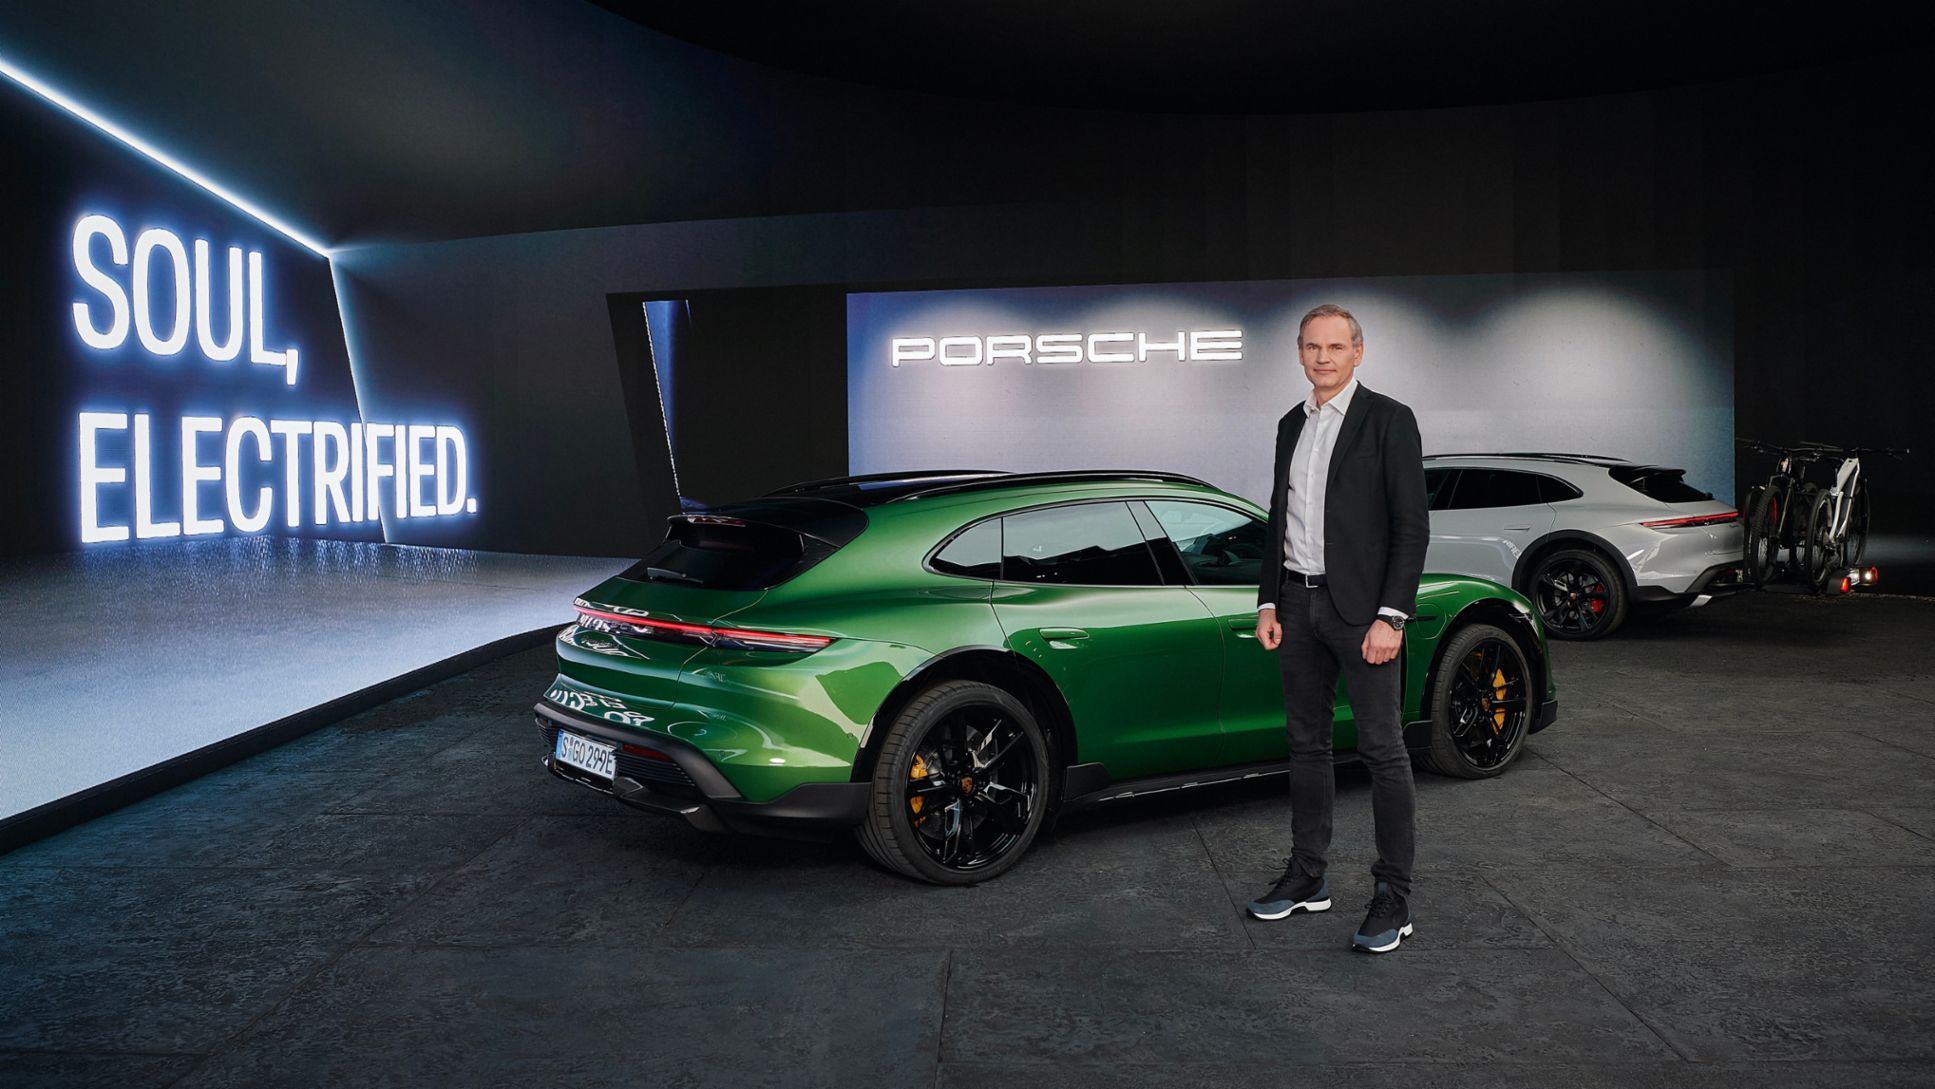 Oliver Blume, Chairman of the Executive Board of Dr. Ing. h.c. F. Porsche AG, Taycan Turbo S Cross Turismo, Taycan 4S Cross Turismo, 2021, Porsche AG